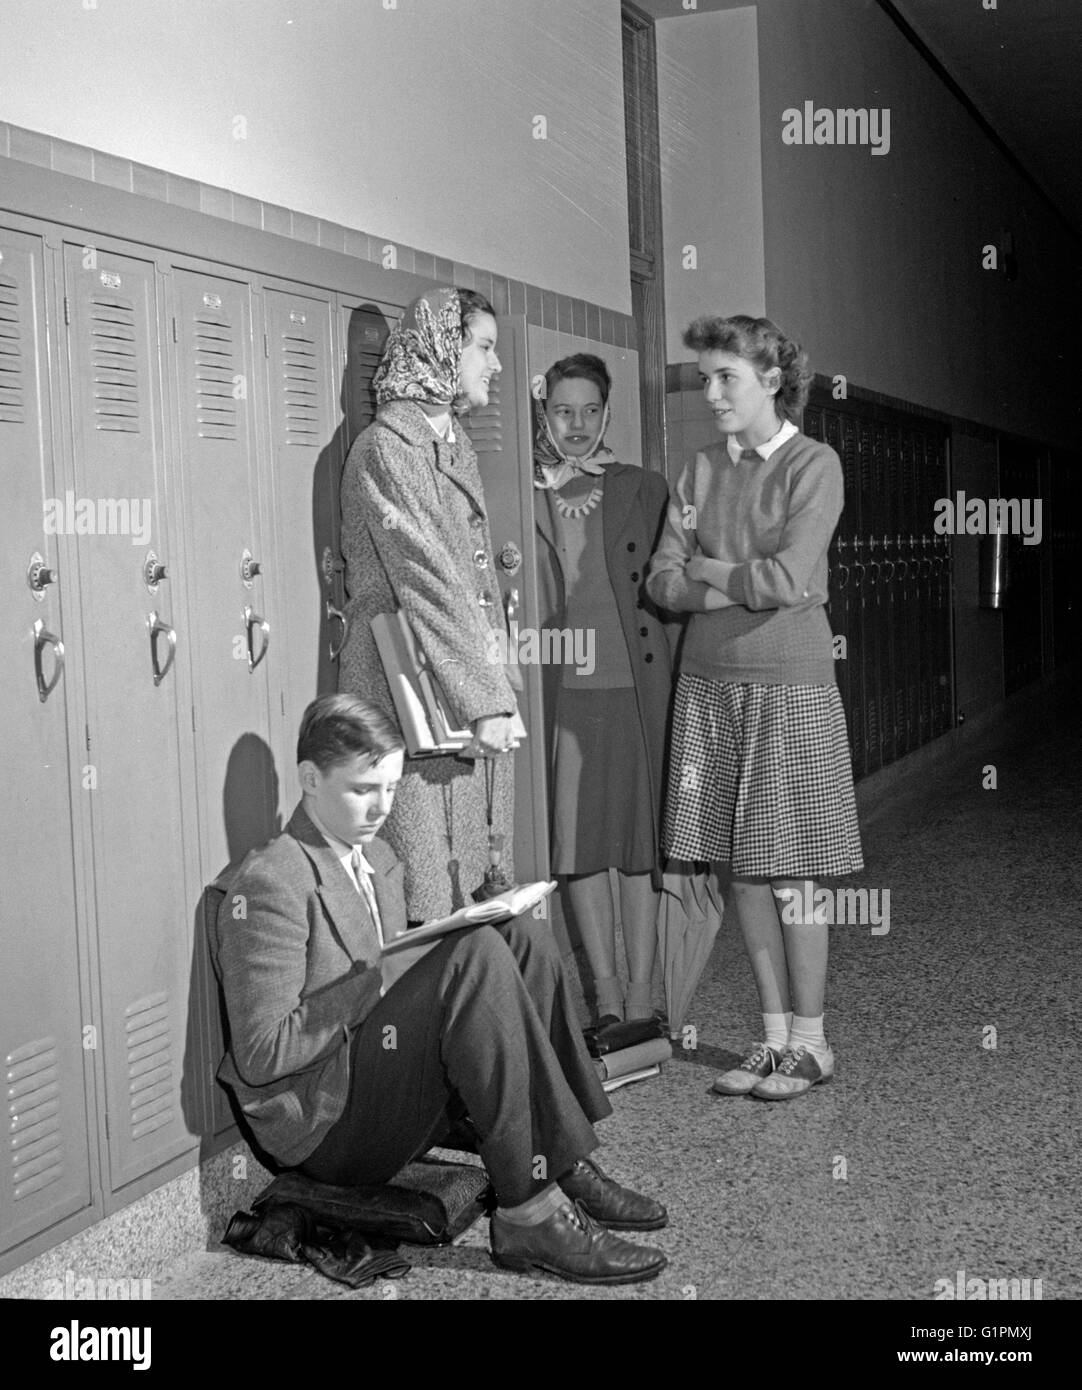 HIGH SCHOOL STUDENTS, 1943. Students at Woodrow Wilson High School in Washington, D.C. Photograph by Esther Bubley, 1943. Stock Photo